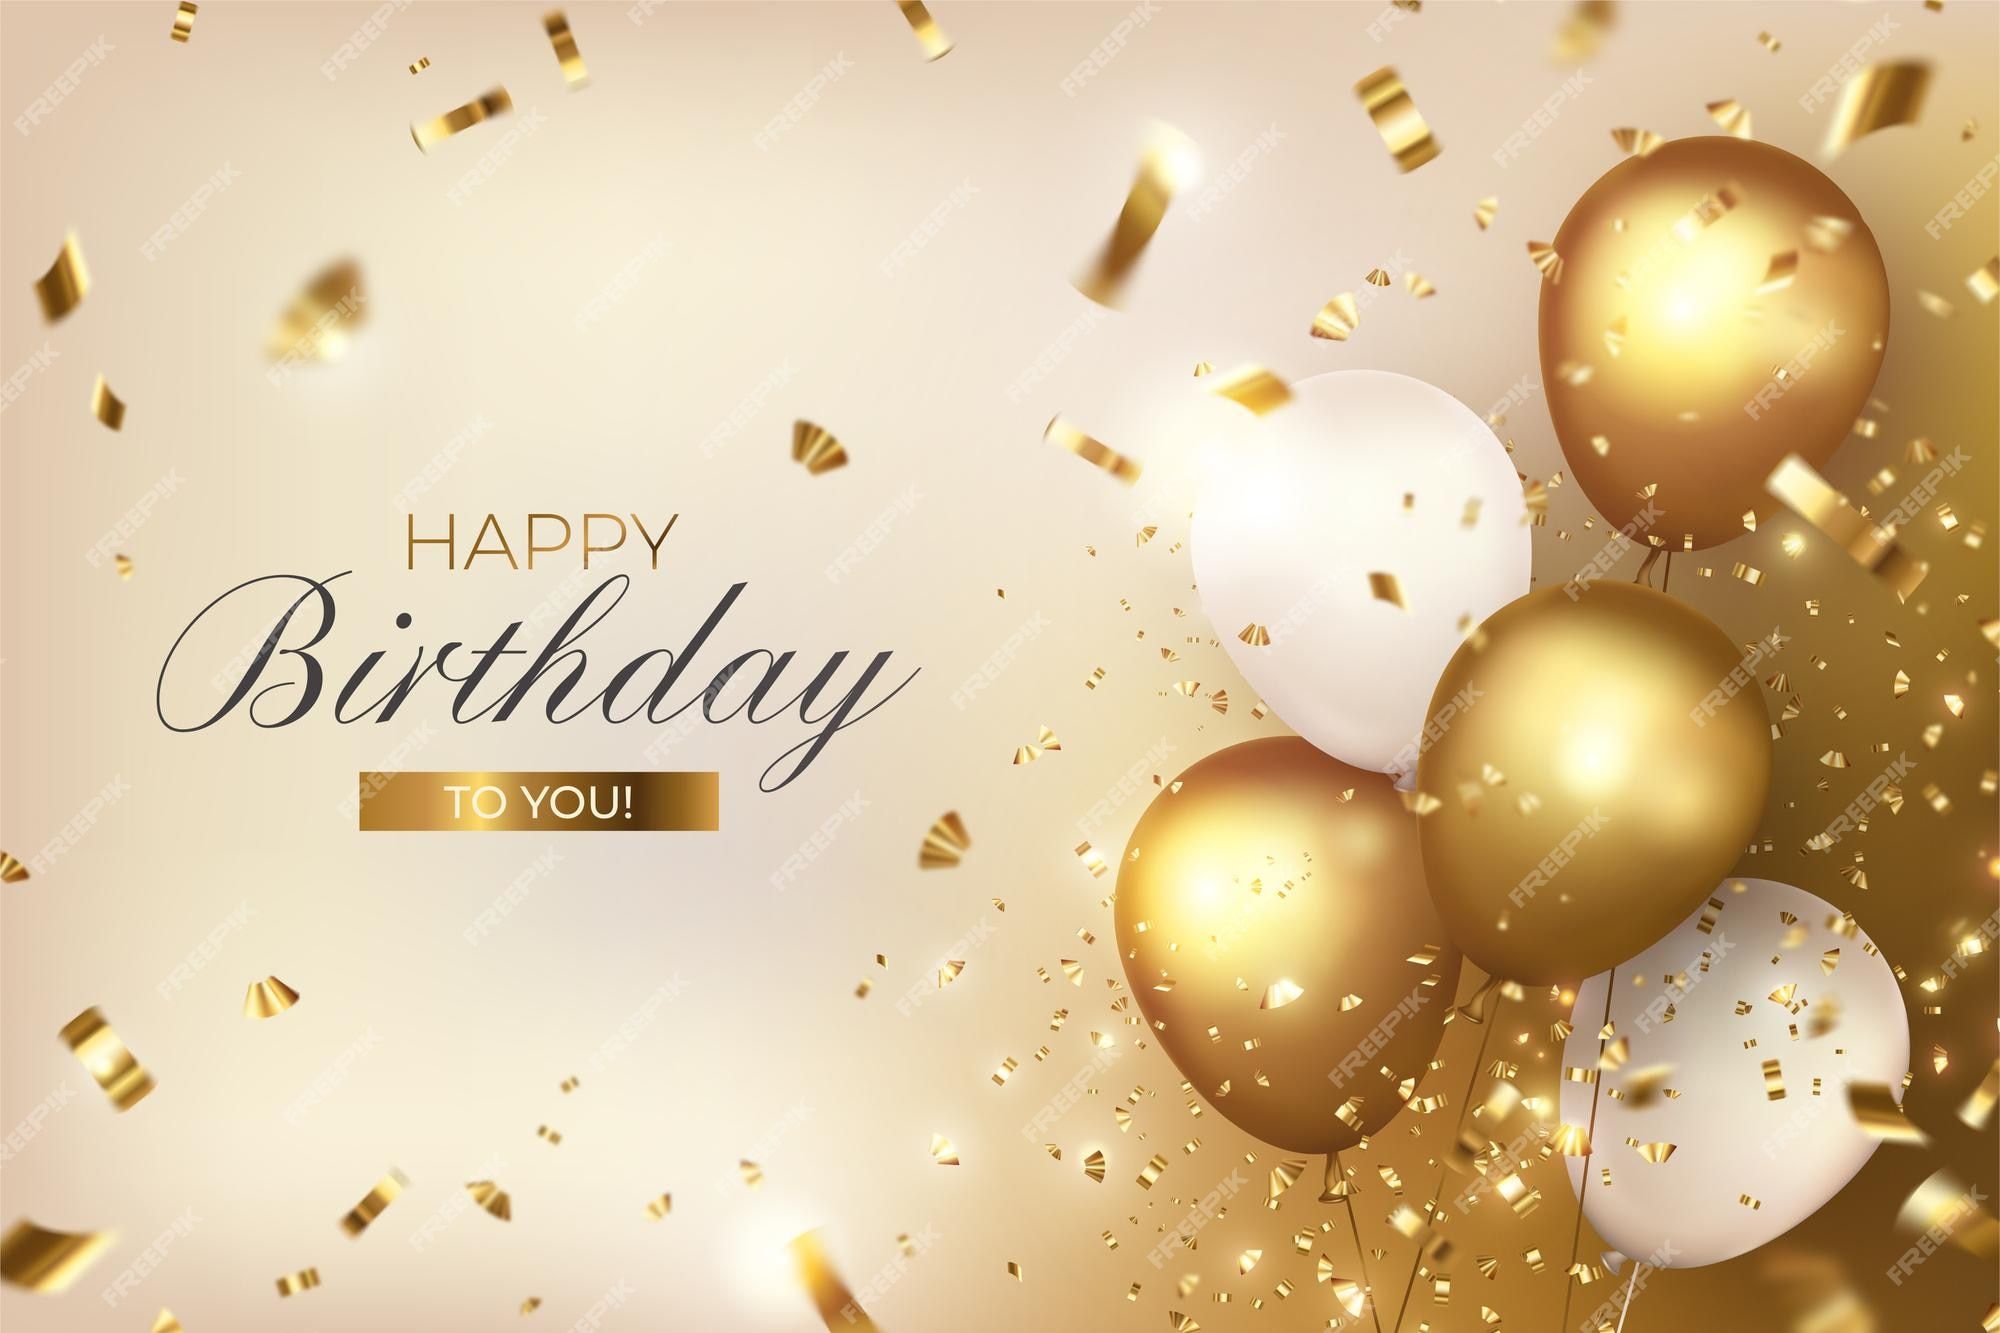 Birthday background with golden balloons and confetti on a beige background - Birthday